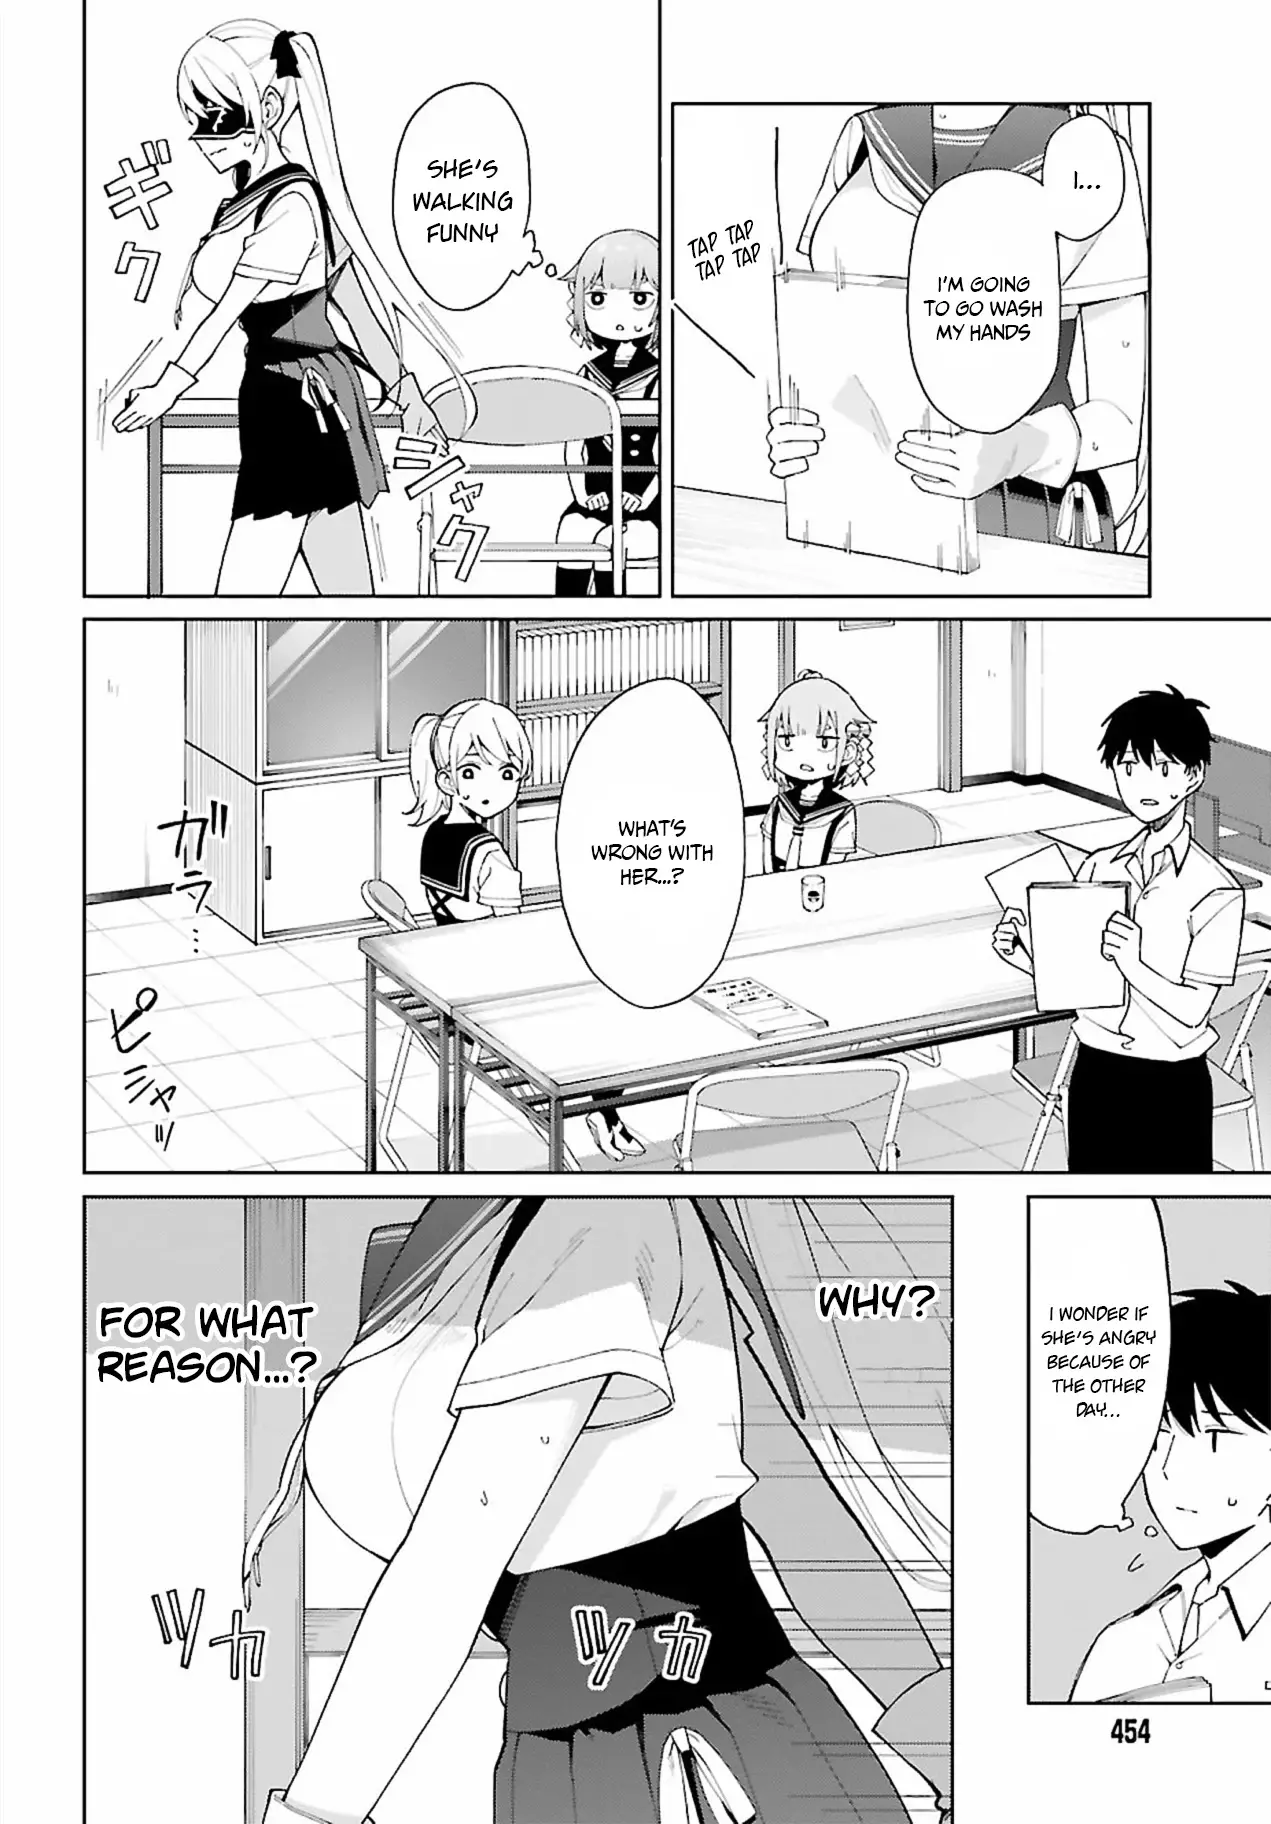 I Don't Understand Shirogane-San's Facial Expression At All - 6 page 21